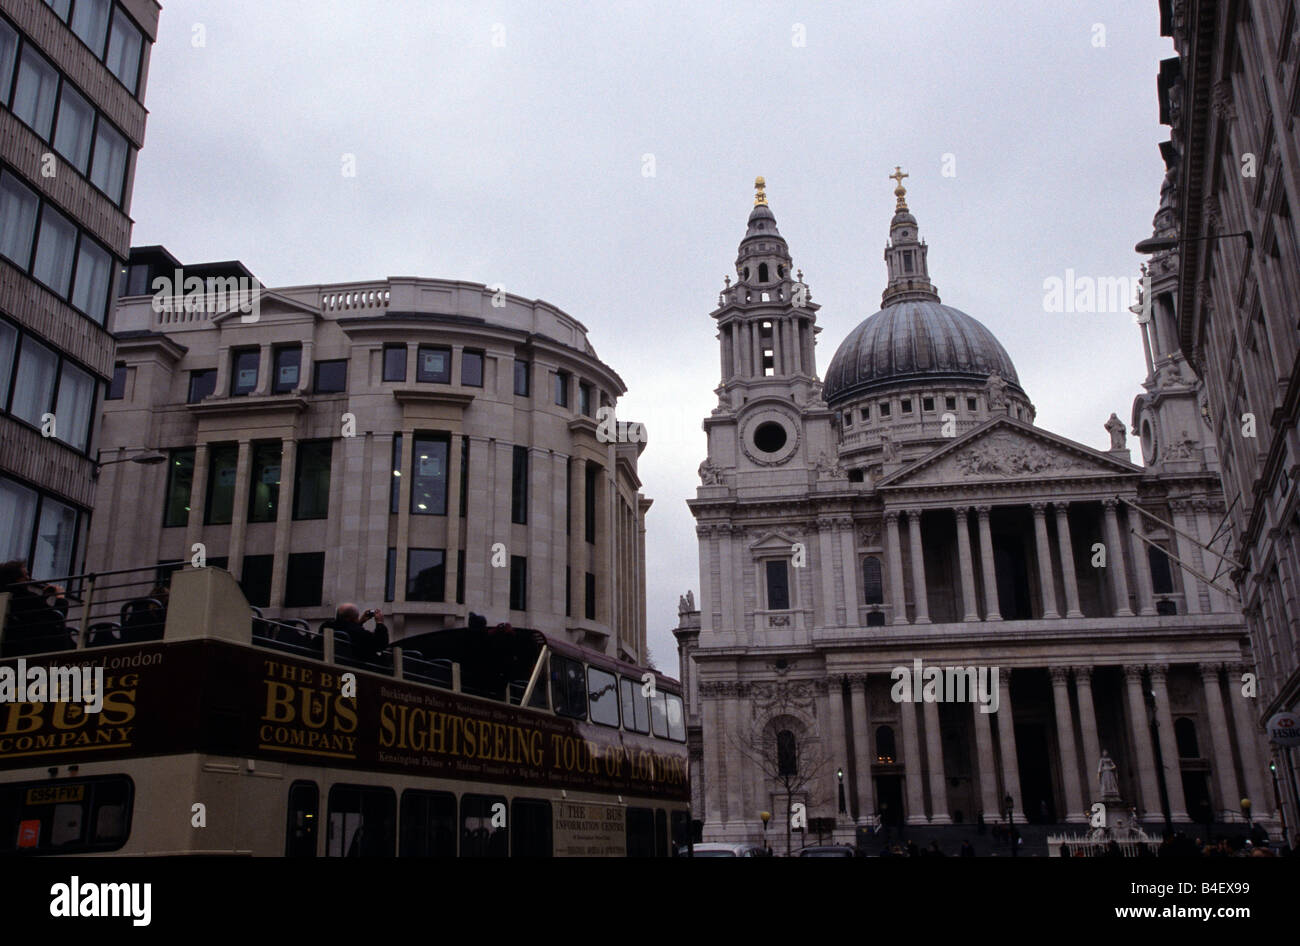 St Paul's Cathedral on Ludgate Hill, London, England, UK Stock Photo